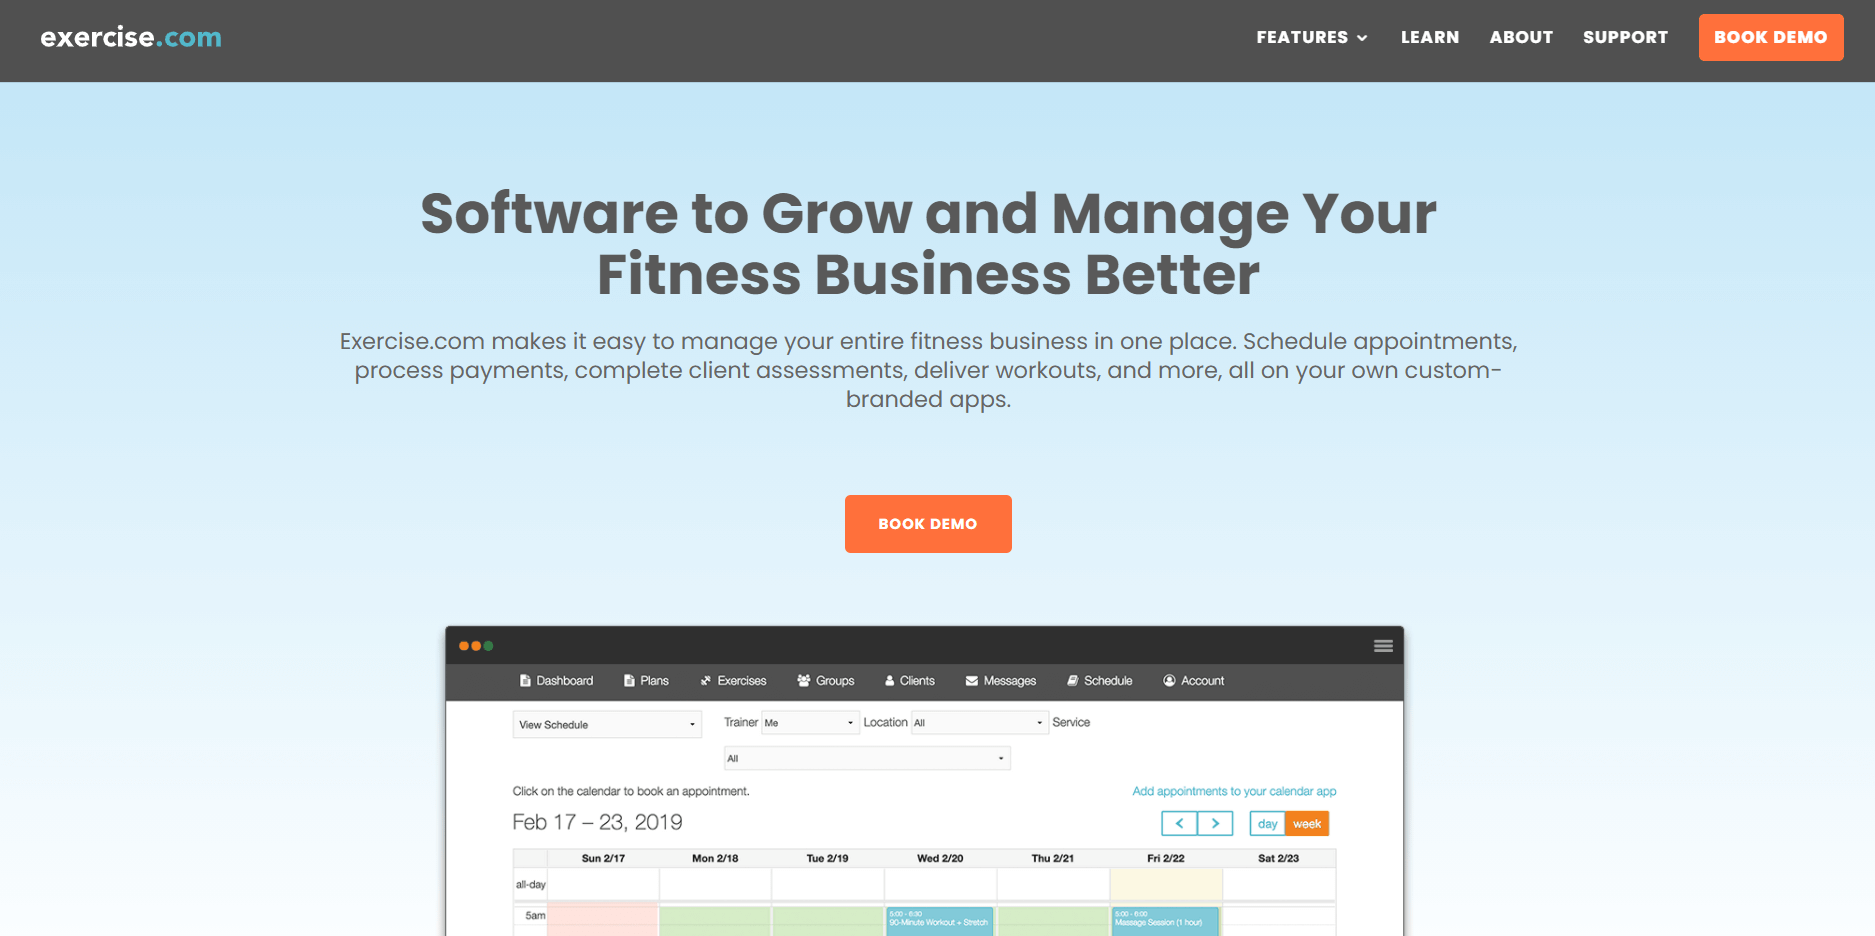 BEST GYM MANAGEMENT SOFTWARE. Gym management app are highly used…, by  Social Gymvale